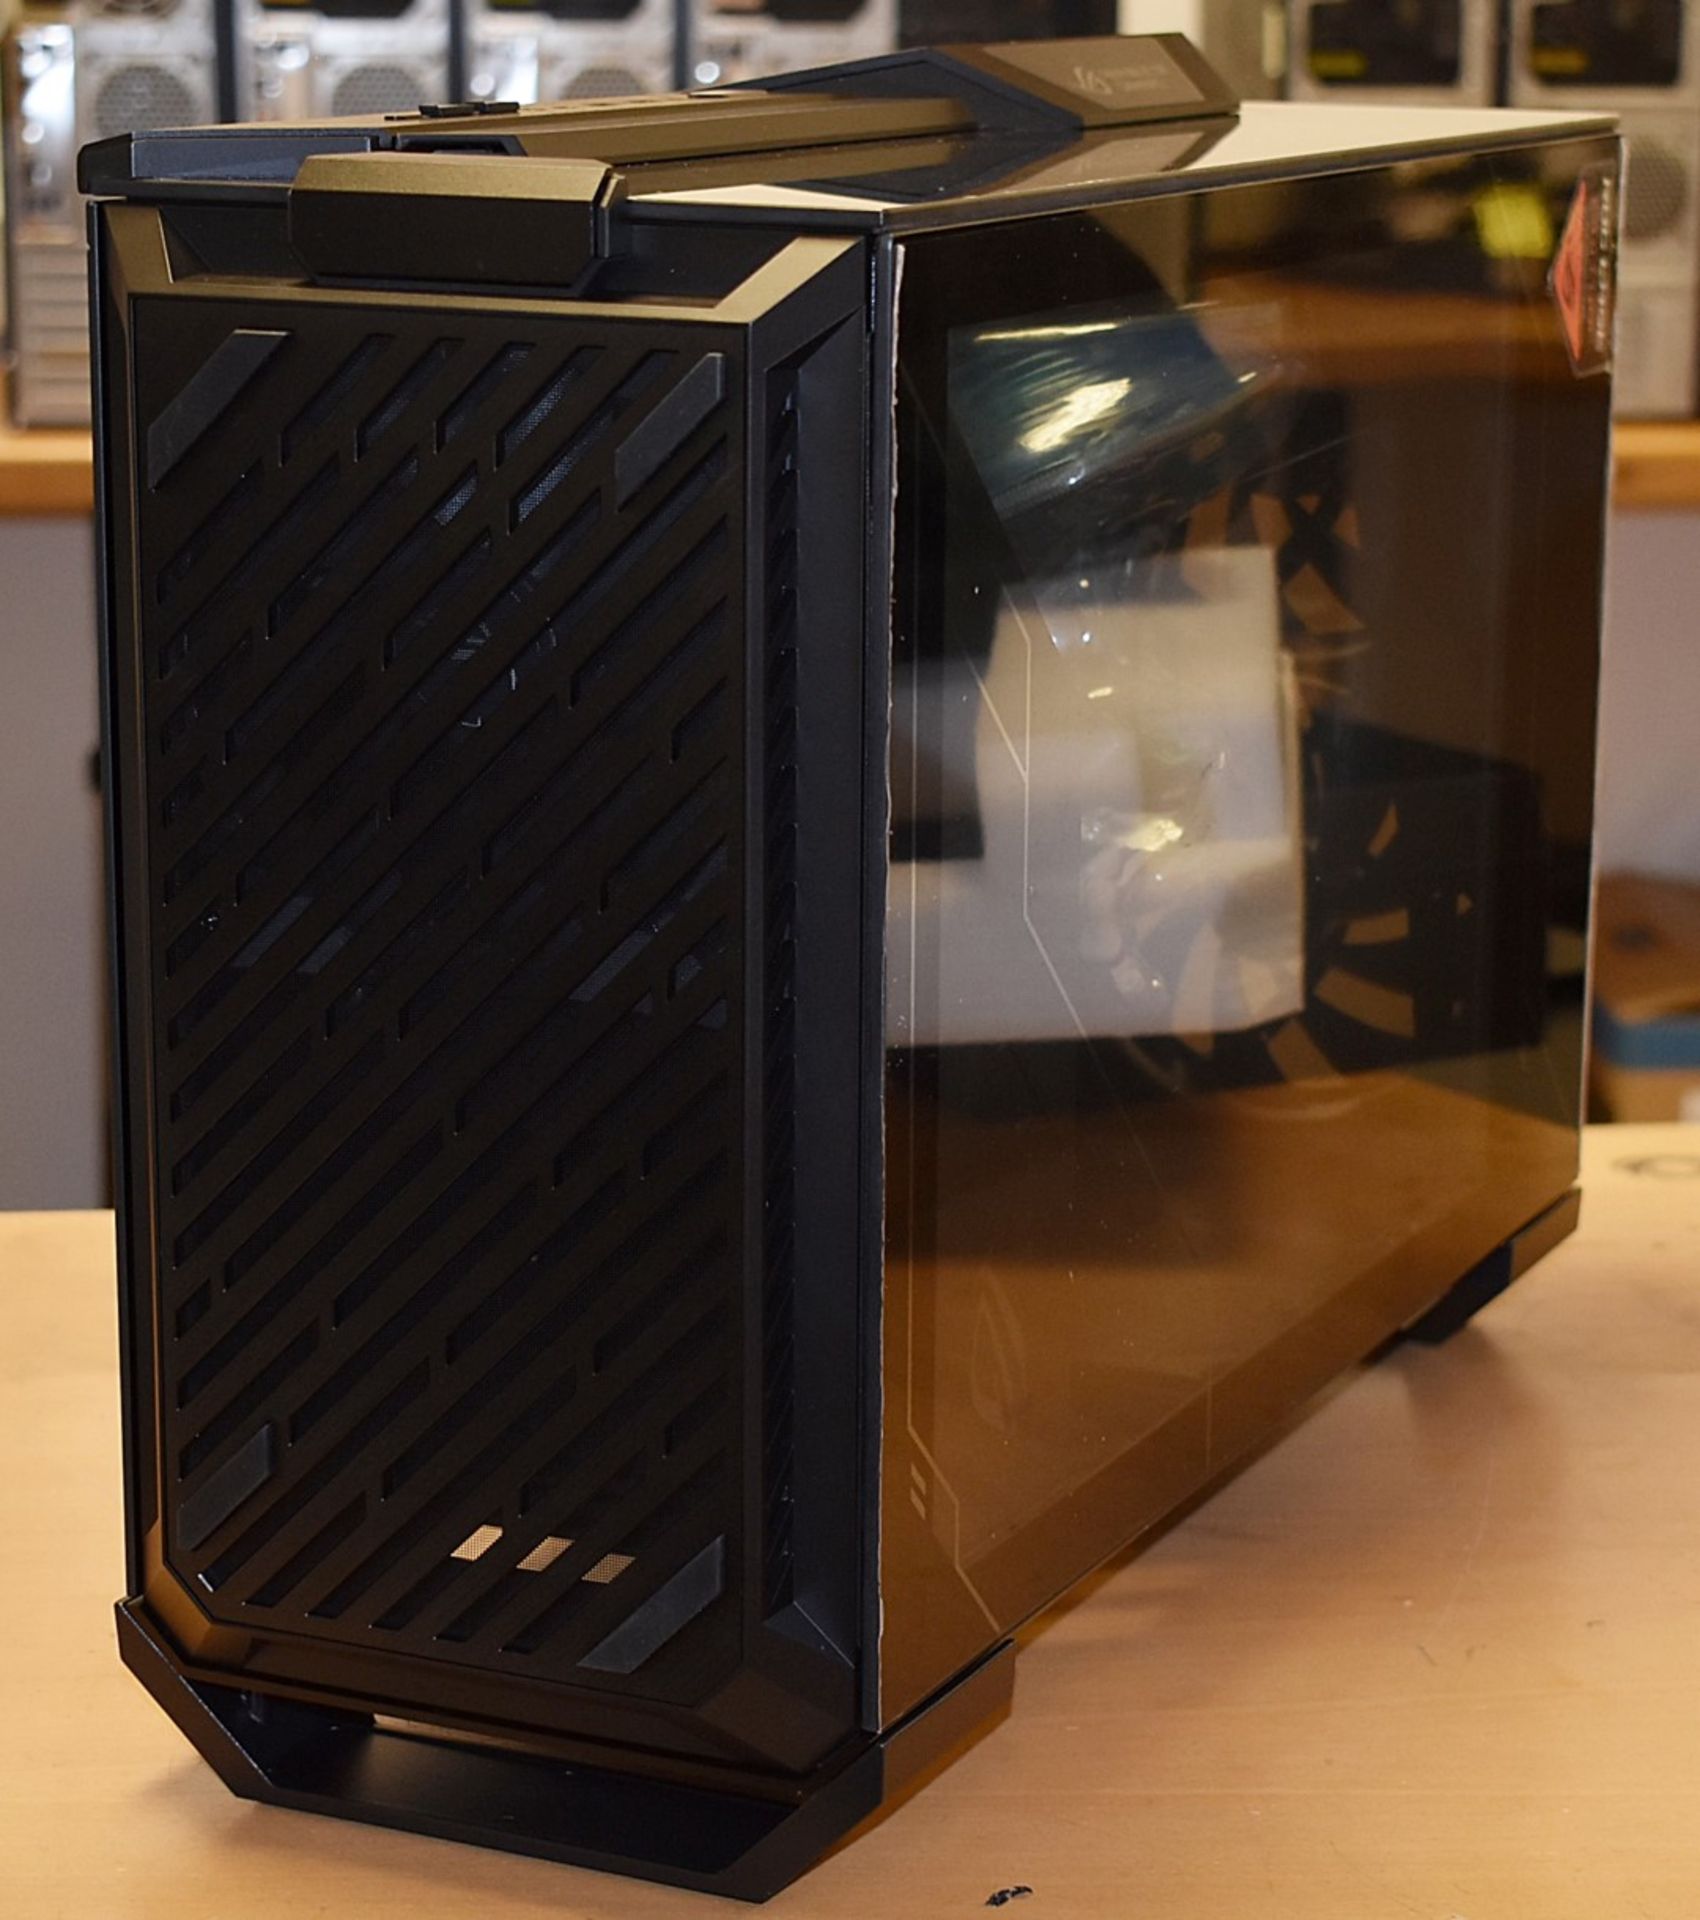 1 x Asus ROG Z11 Mini-ITX PC Gaming Case - Black Finish With Side Window and Limited Edition - Image 8 of 15